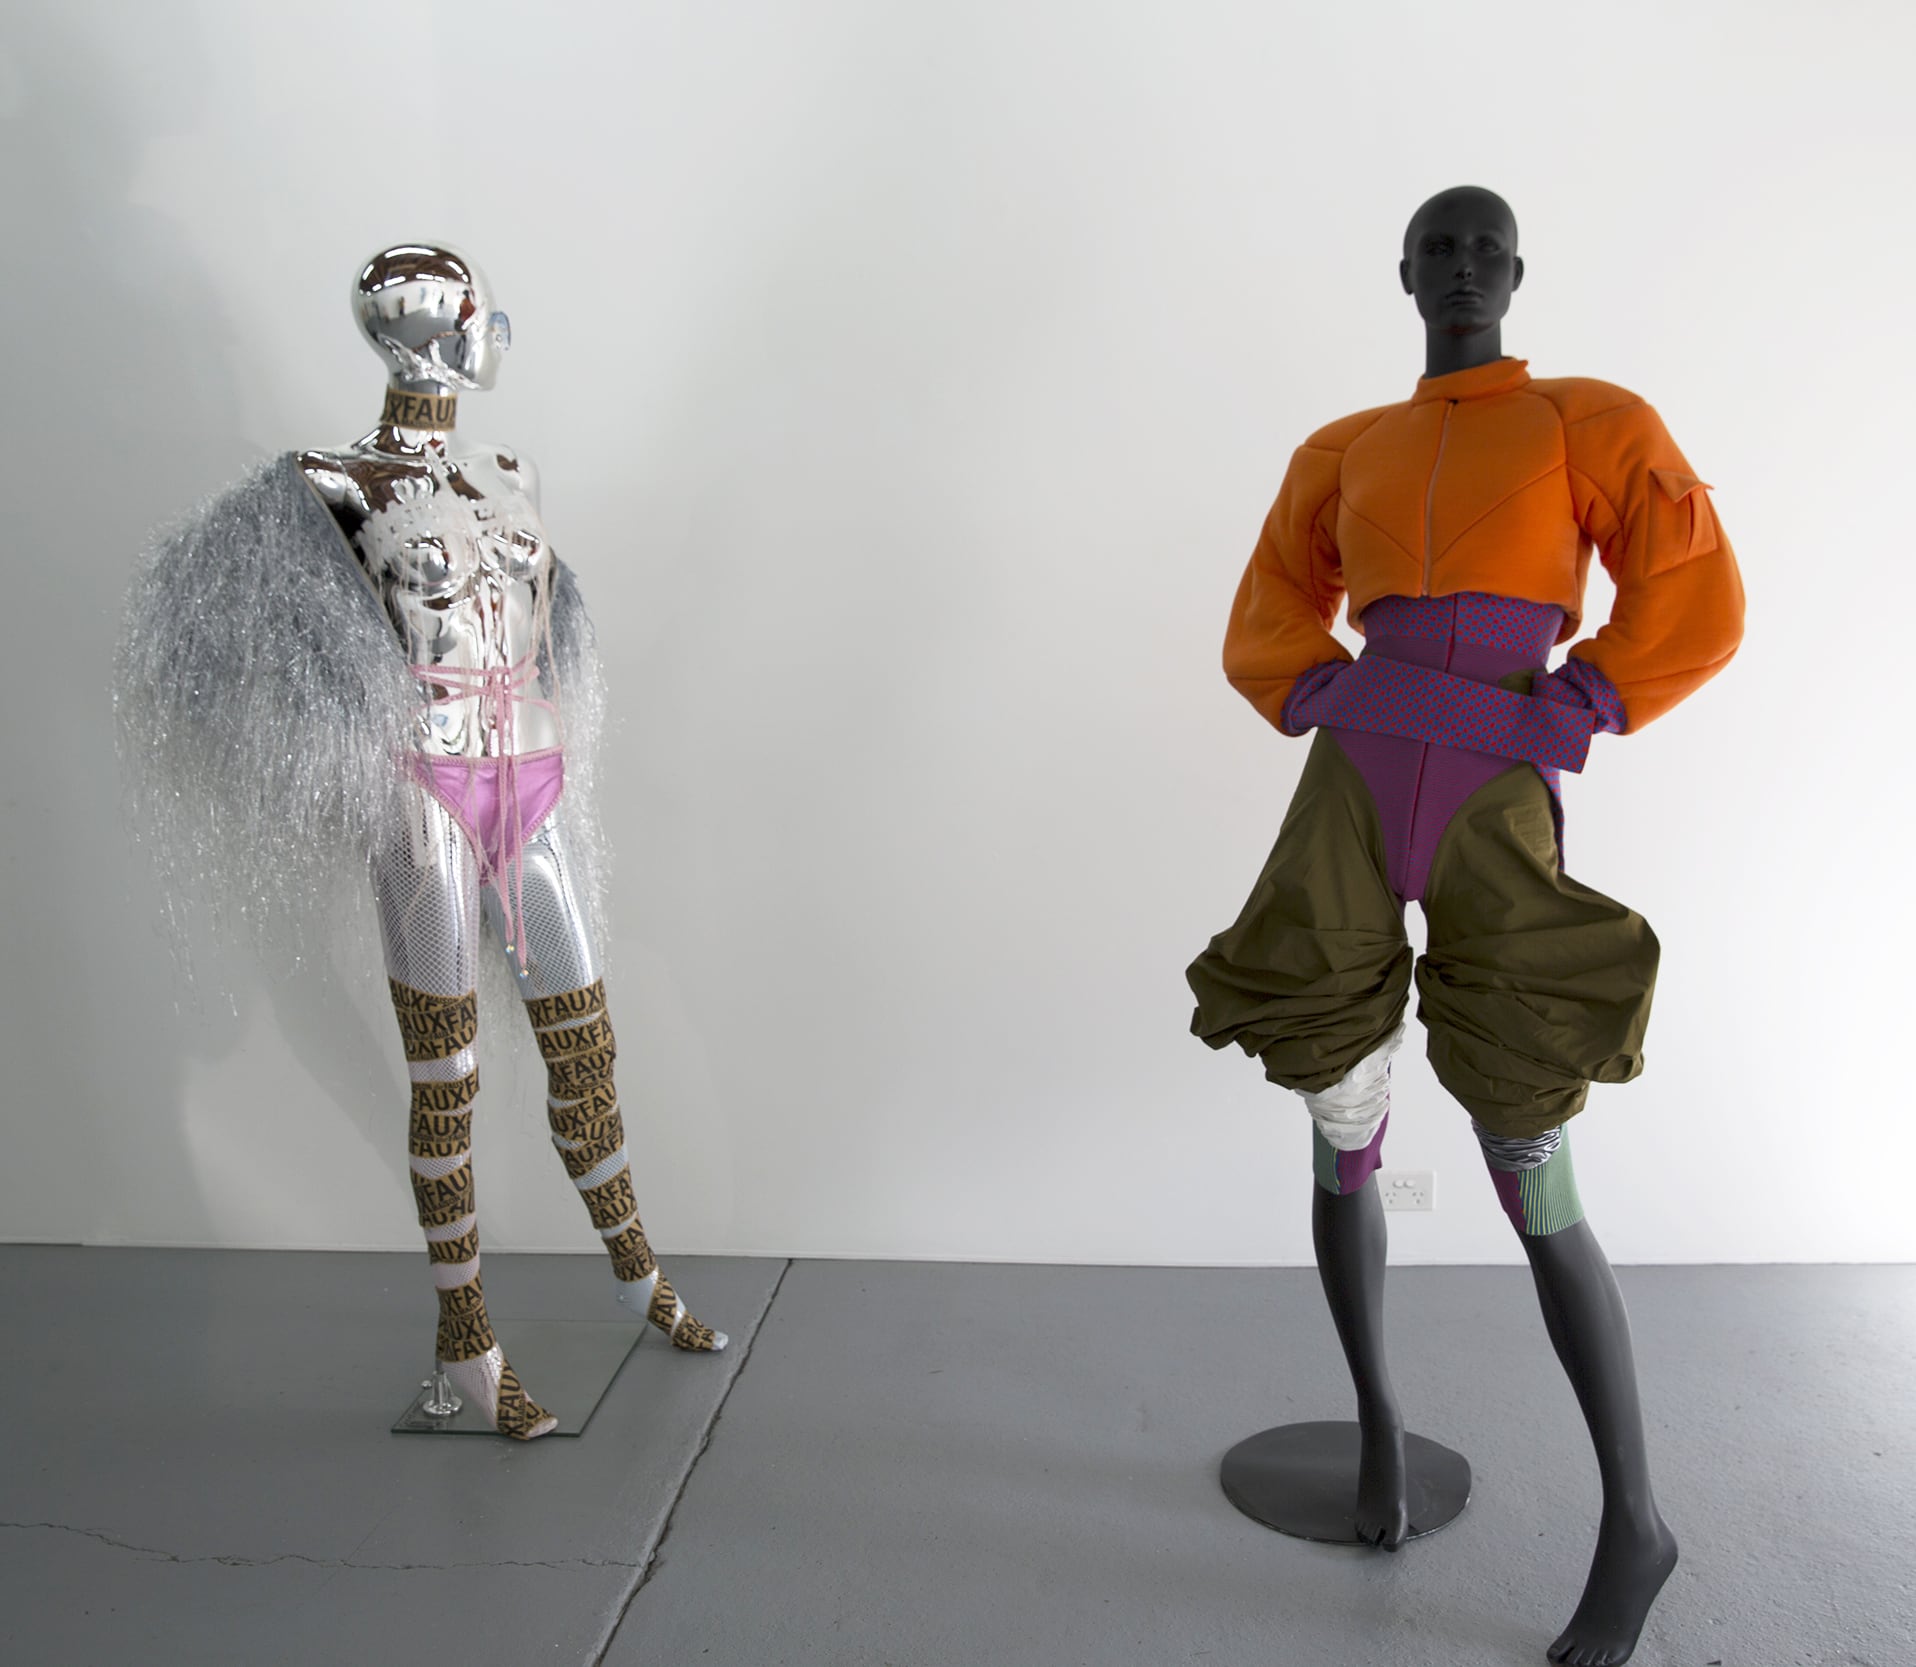 Image 03: Installation view, Gallery 1 L-R: Maison the Faux, untitled – sloppy handwoven fringe coat, handwoven recycled denim fringe coat, presented 2016; Laura / Deanna Fanning, The Tell, 2018, wool, lycra and cotton. Image: Rafaela Pandolfini.